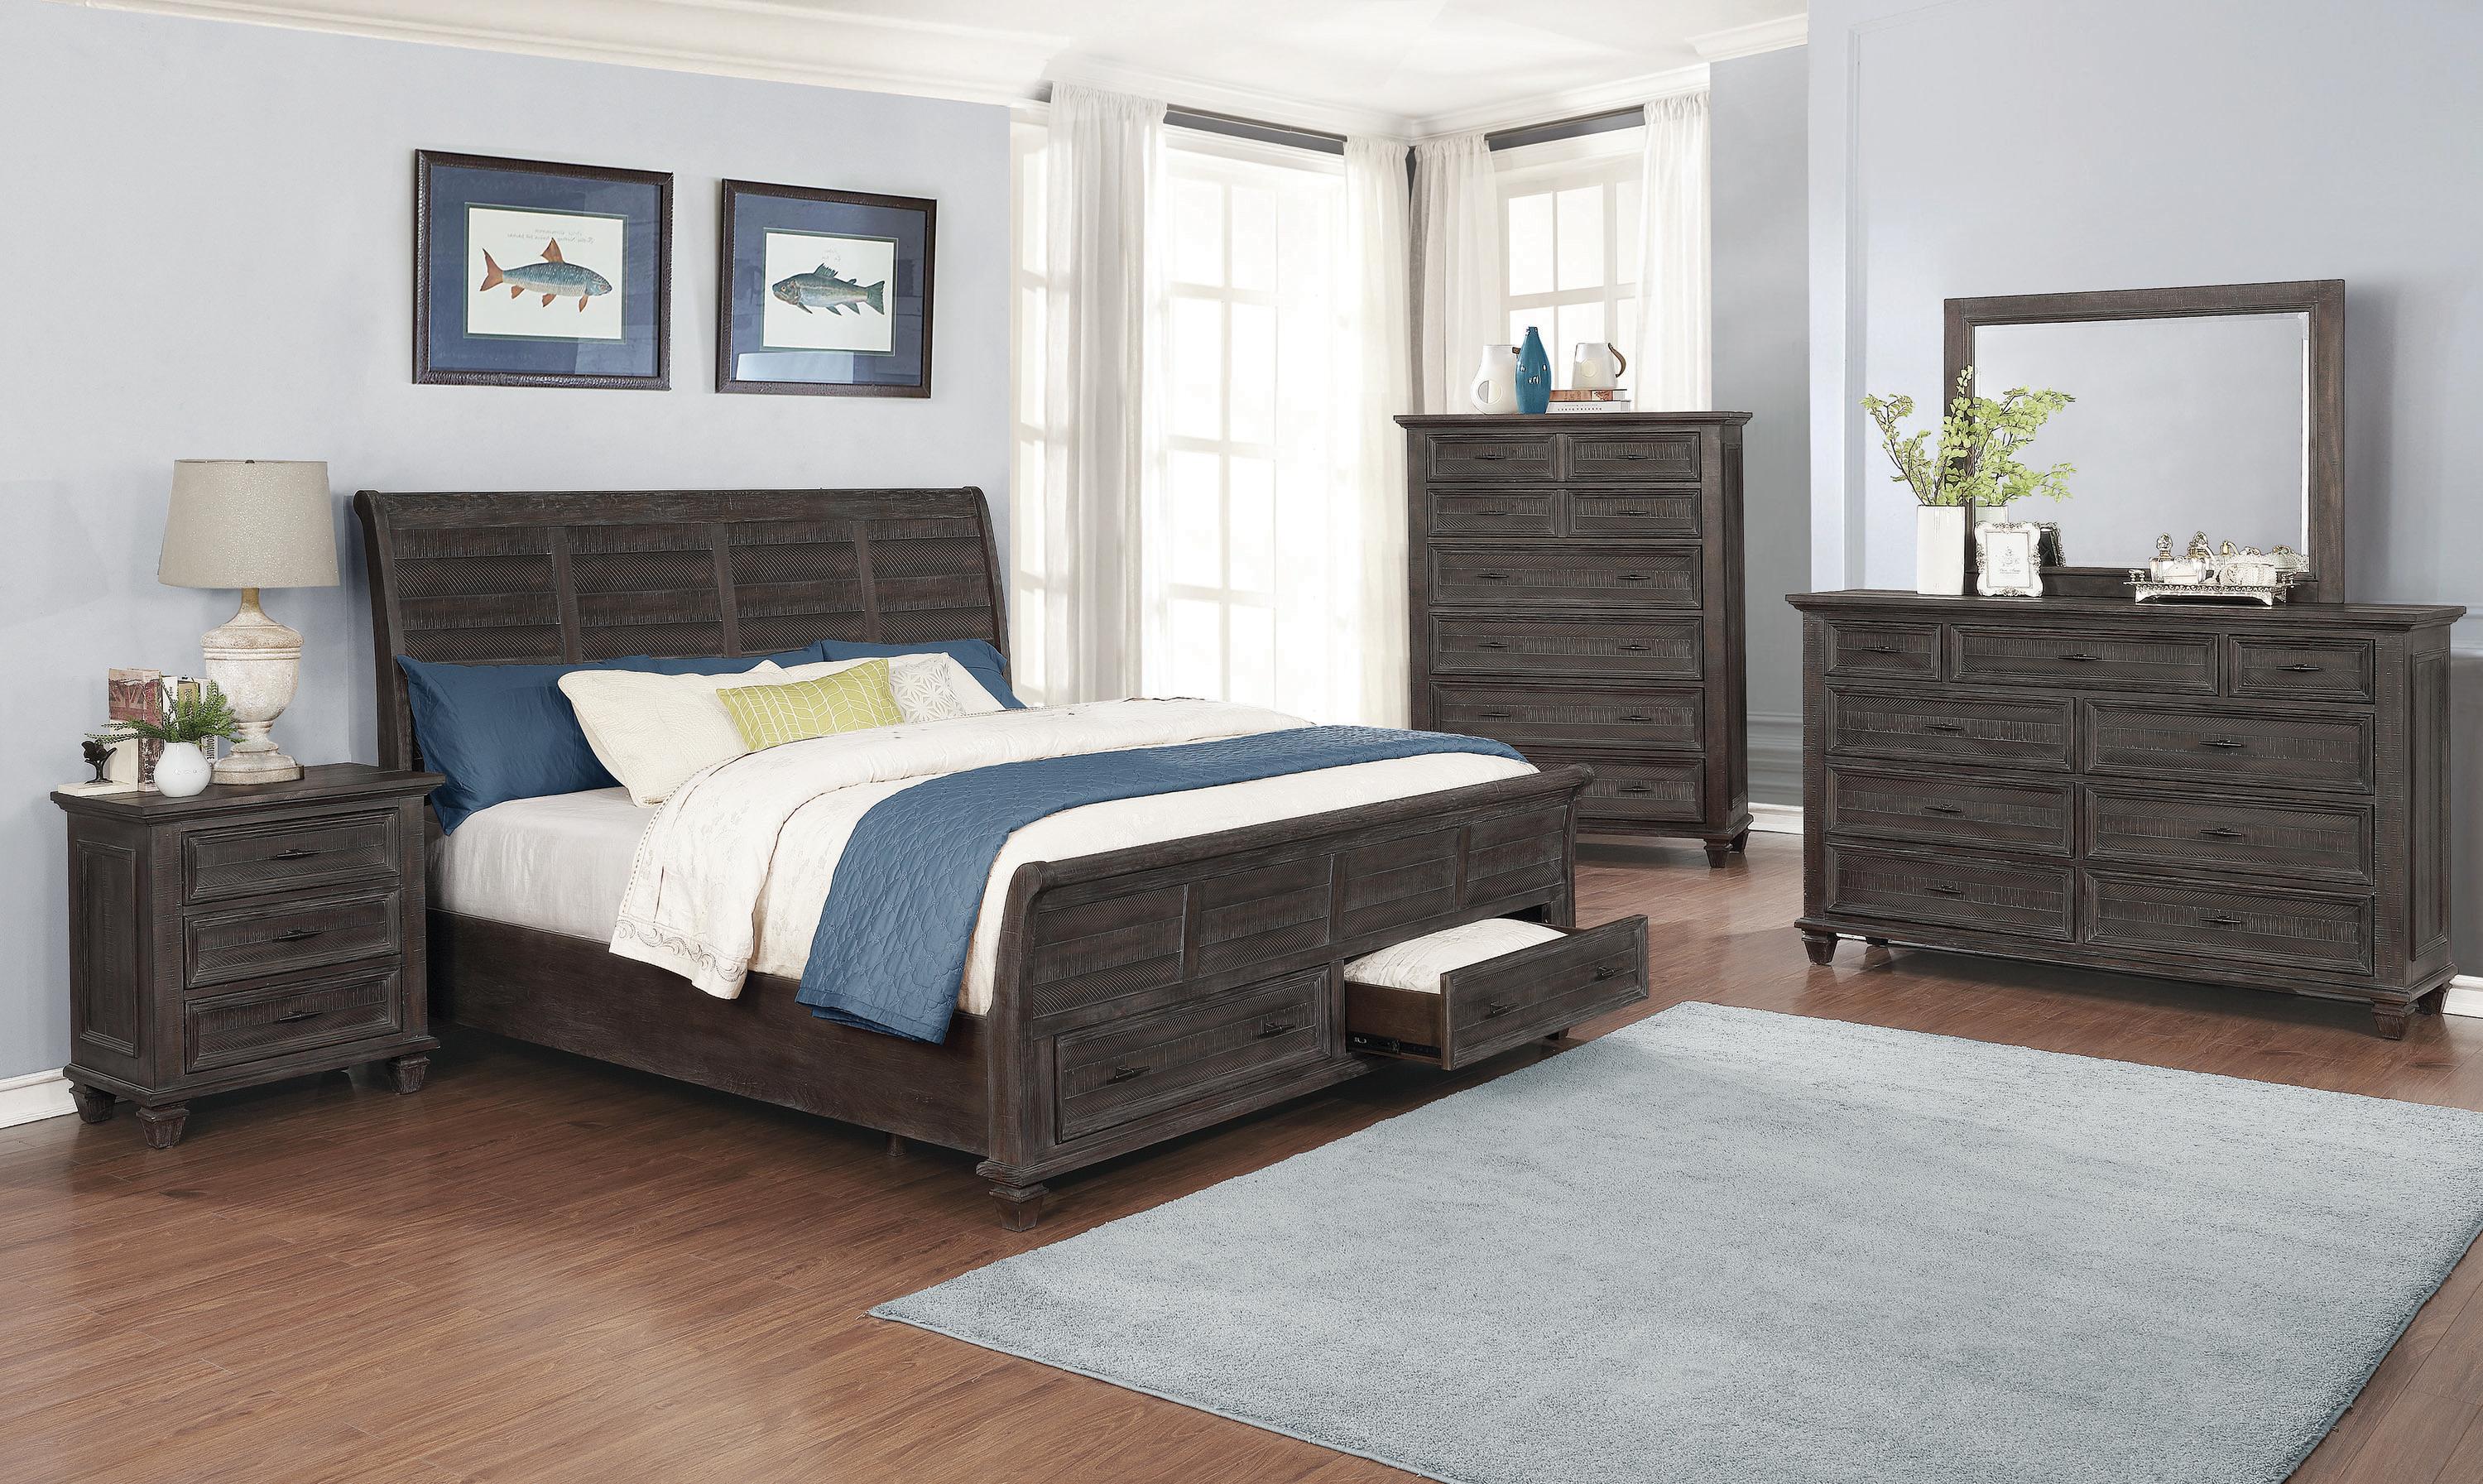 

    
Transitional Weathered Carbon Wood Queen Bedroom Set 5pcs Coaster 222880Q Atascadero
